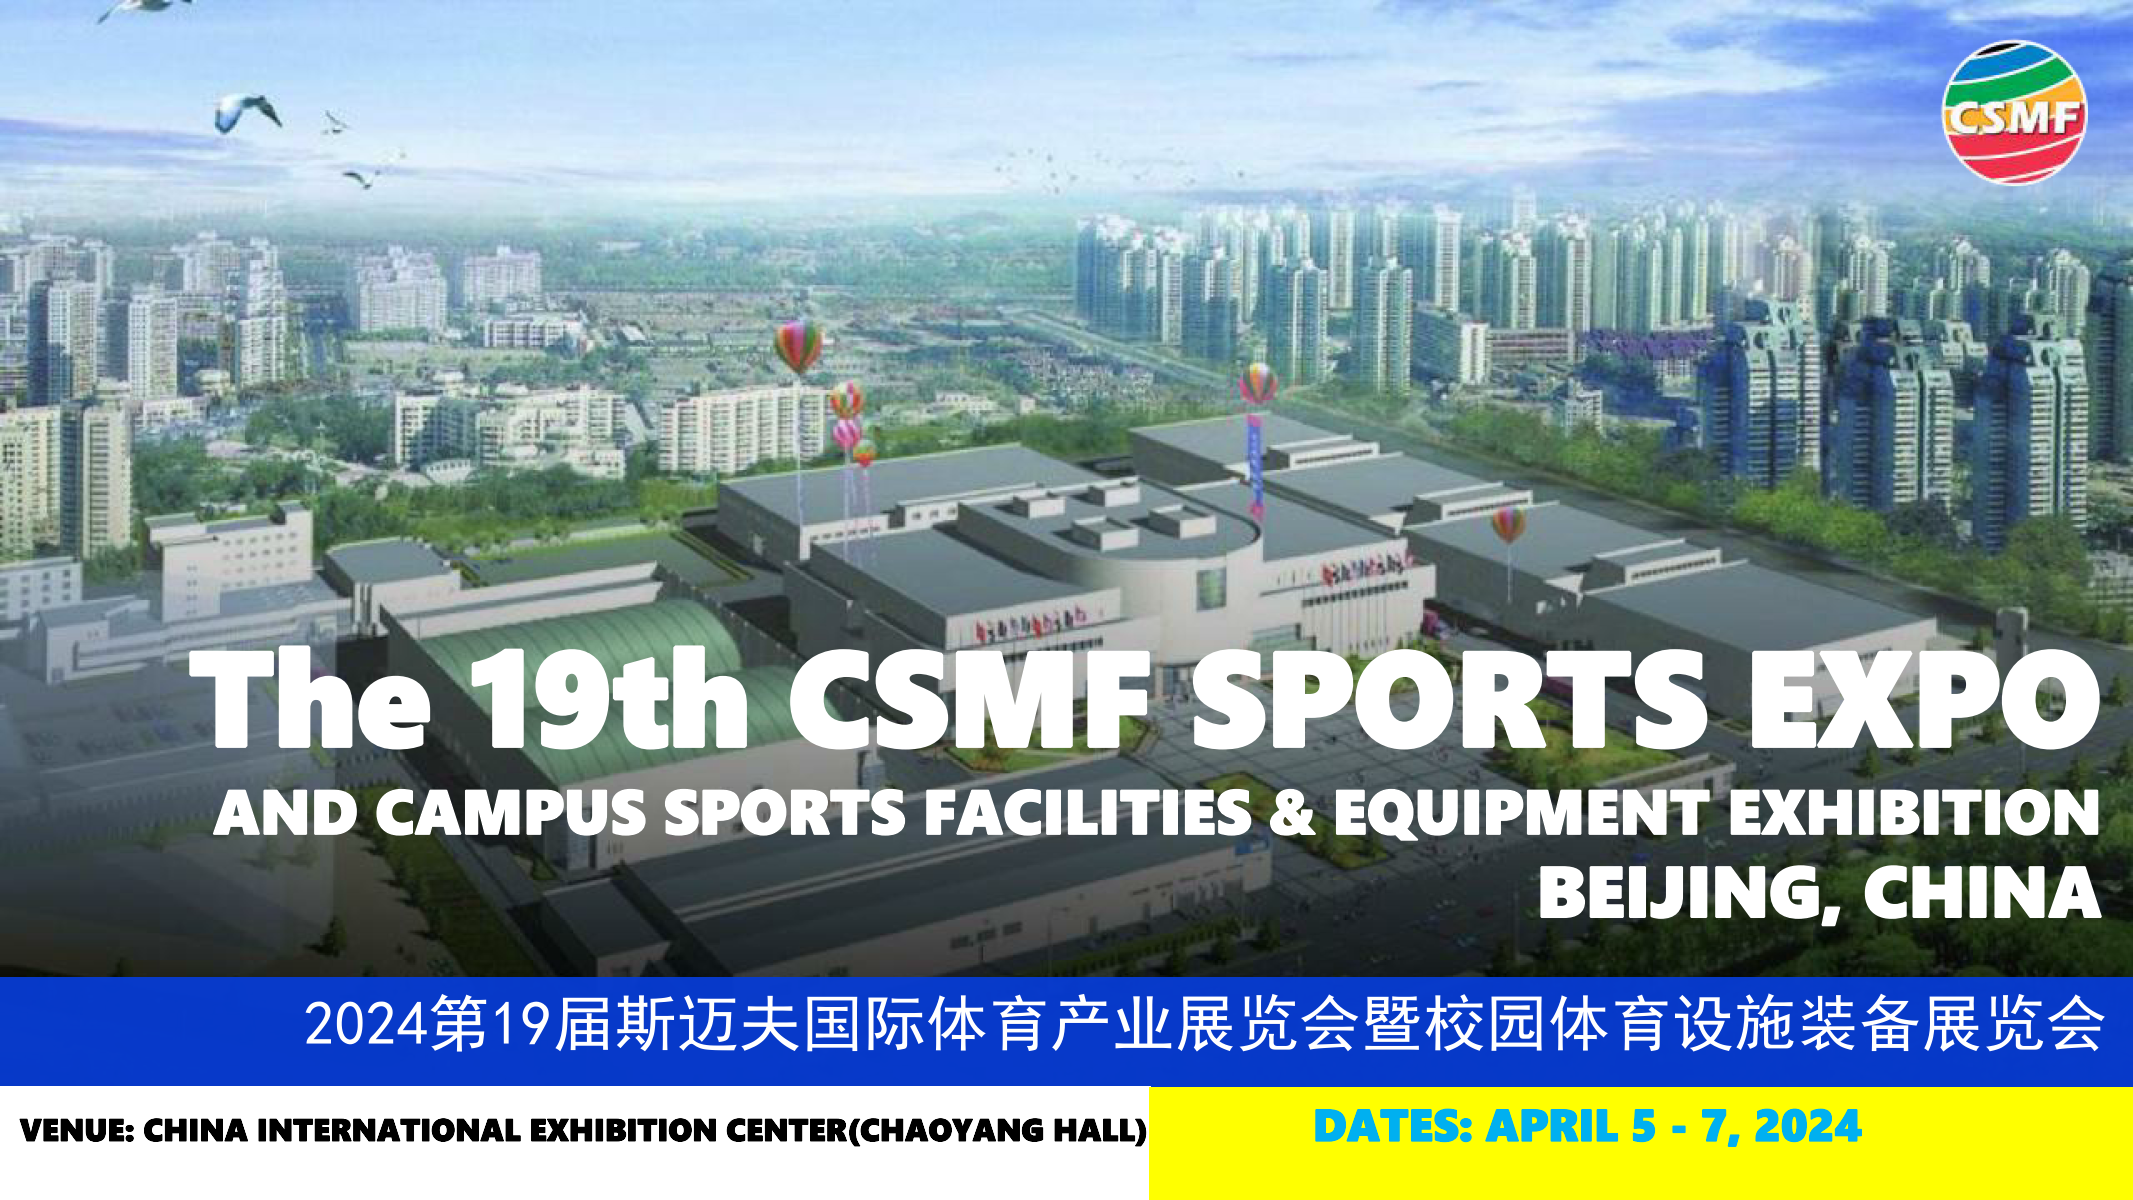 2024 THE 19TH CSMF SPORTS EXPO_01